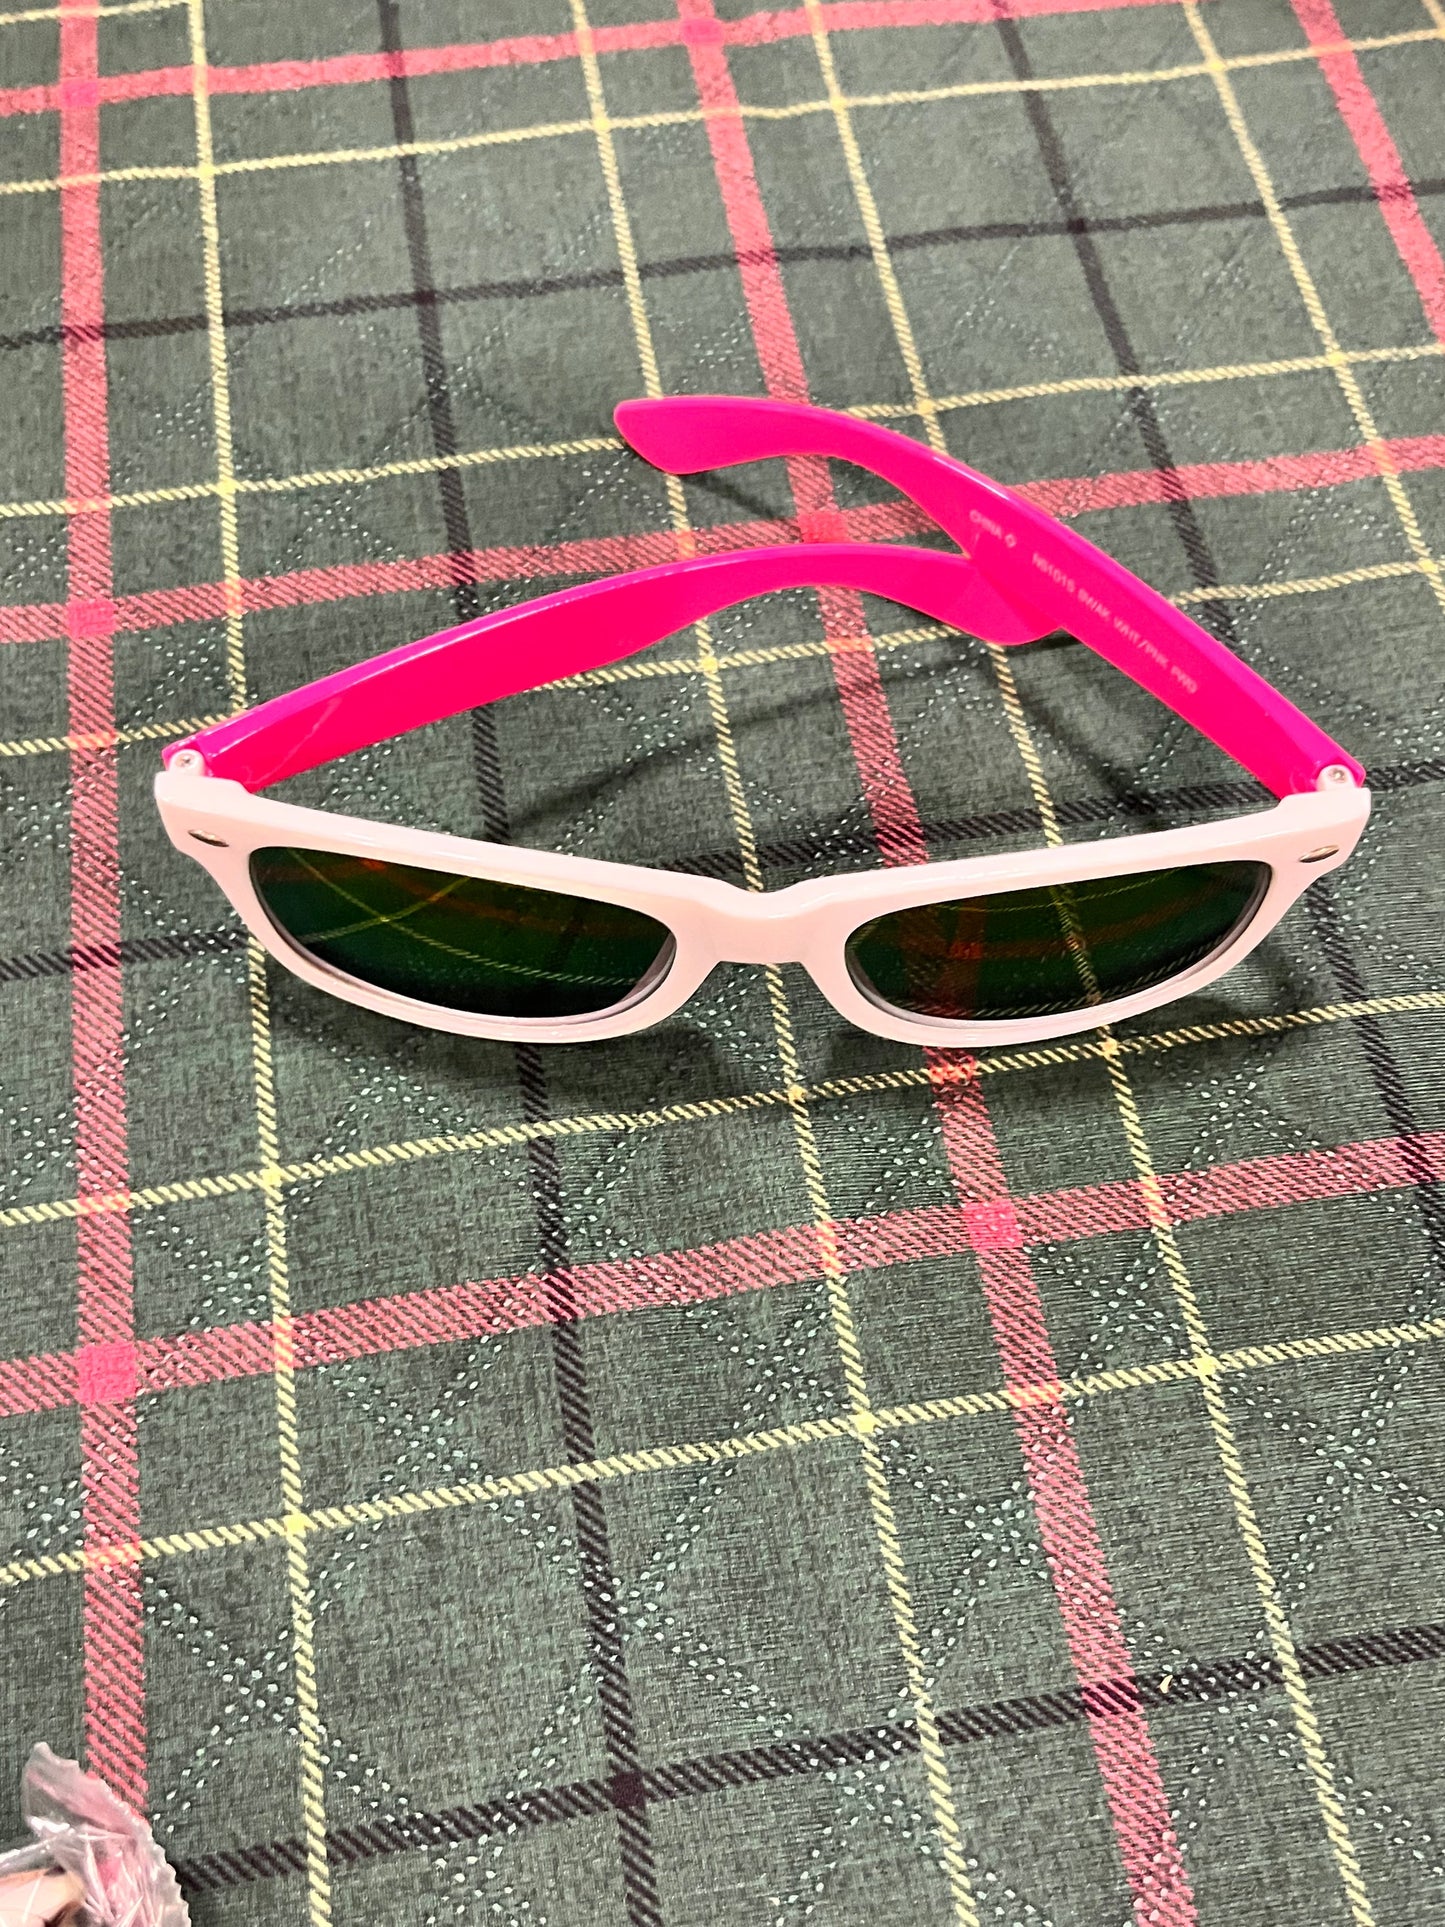 BALLERS: Stripper Shades From Series